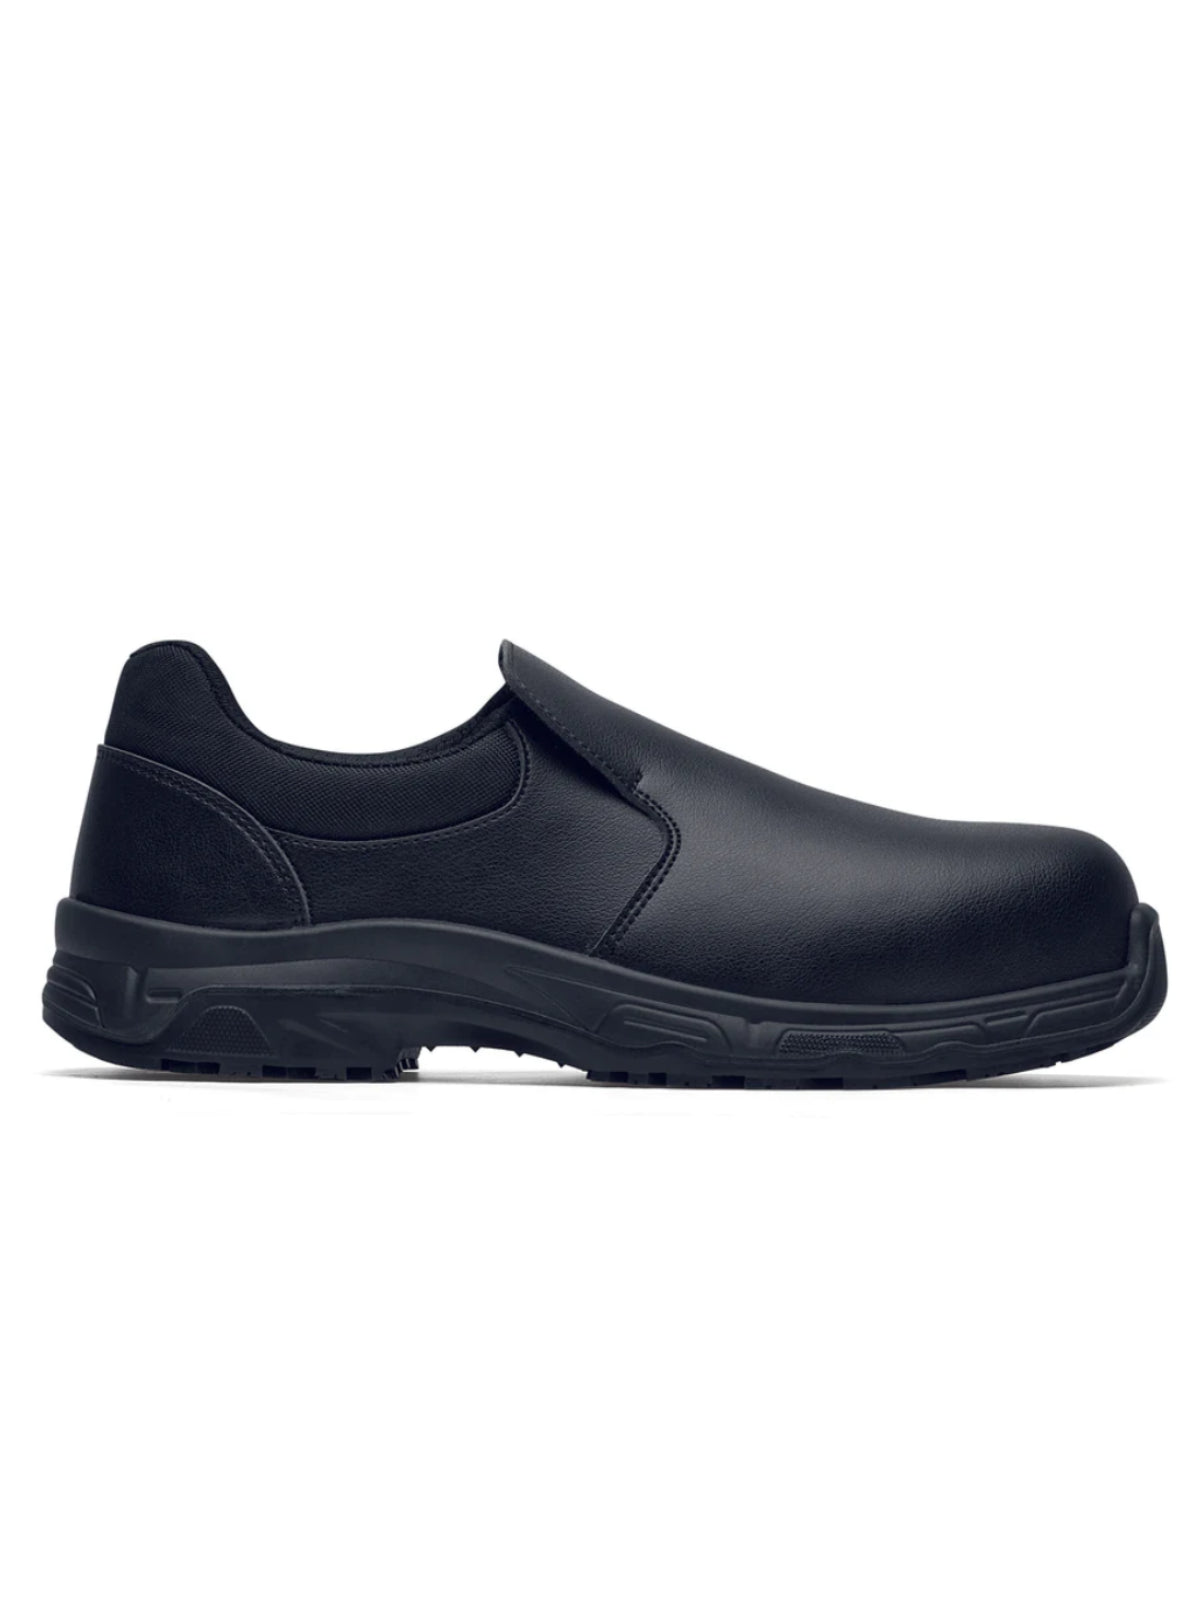 Unisex Safety Shoe Catania Black (S3) by Shoes For Crews -  ChefsCotton